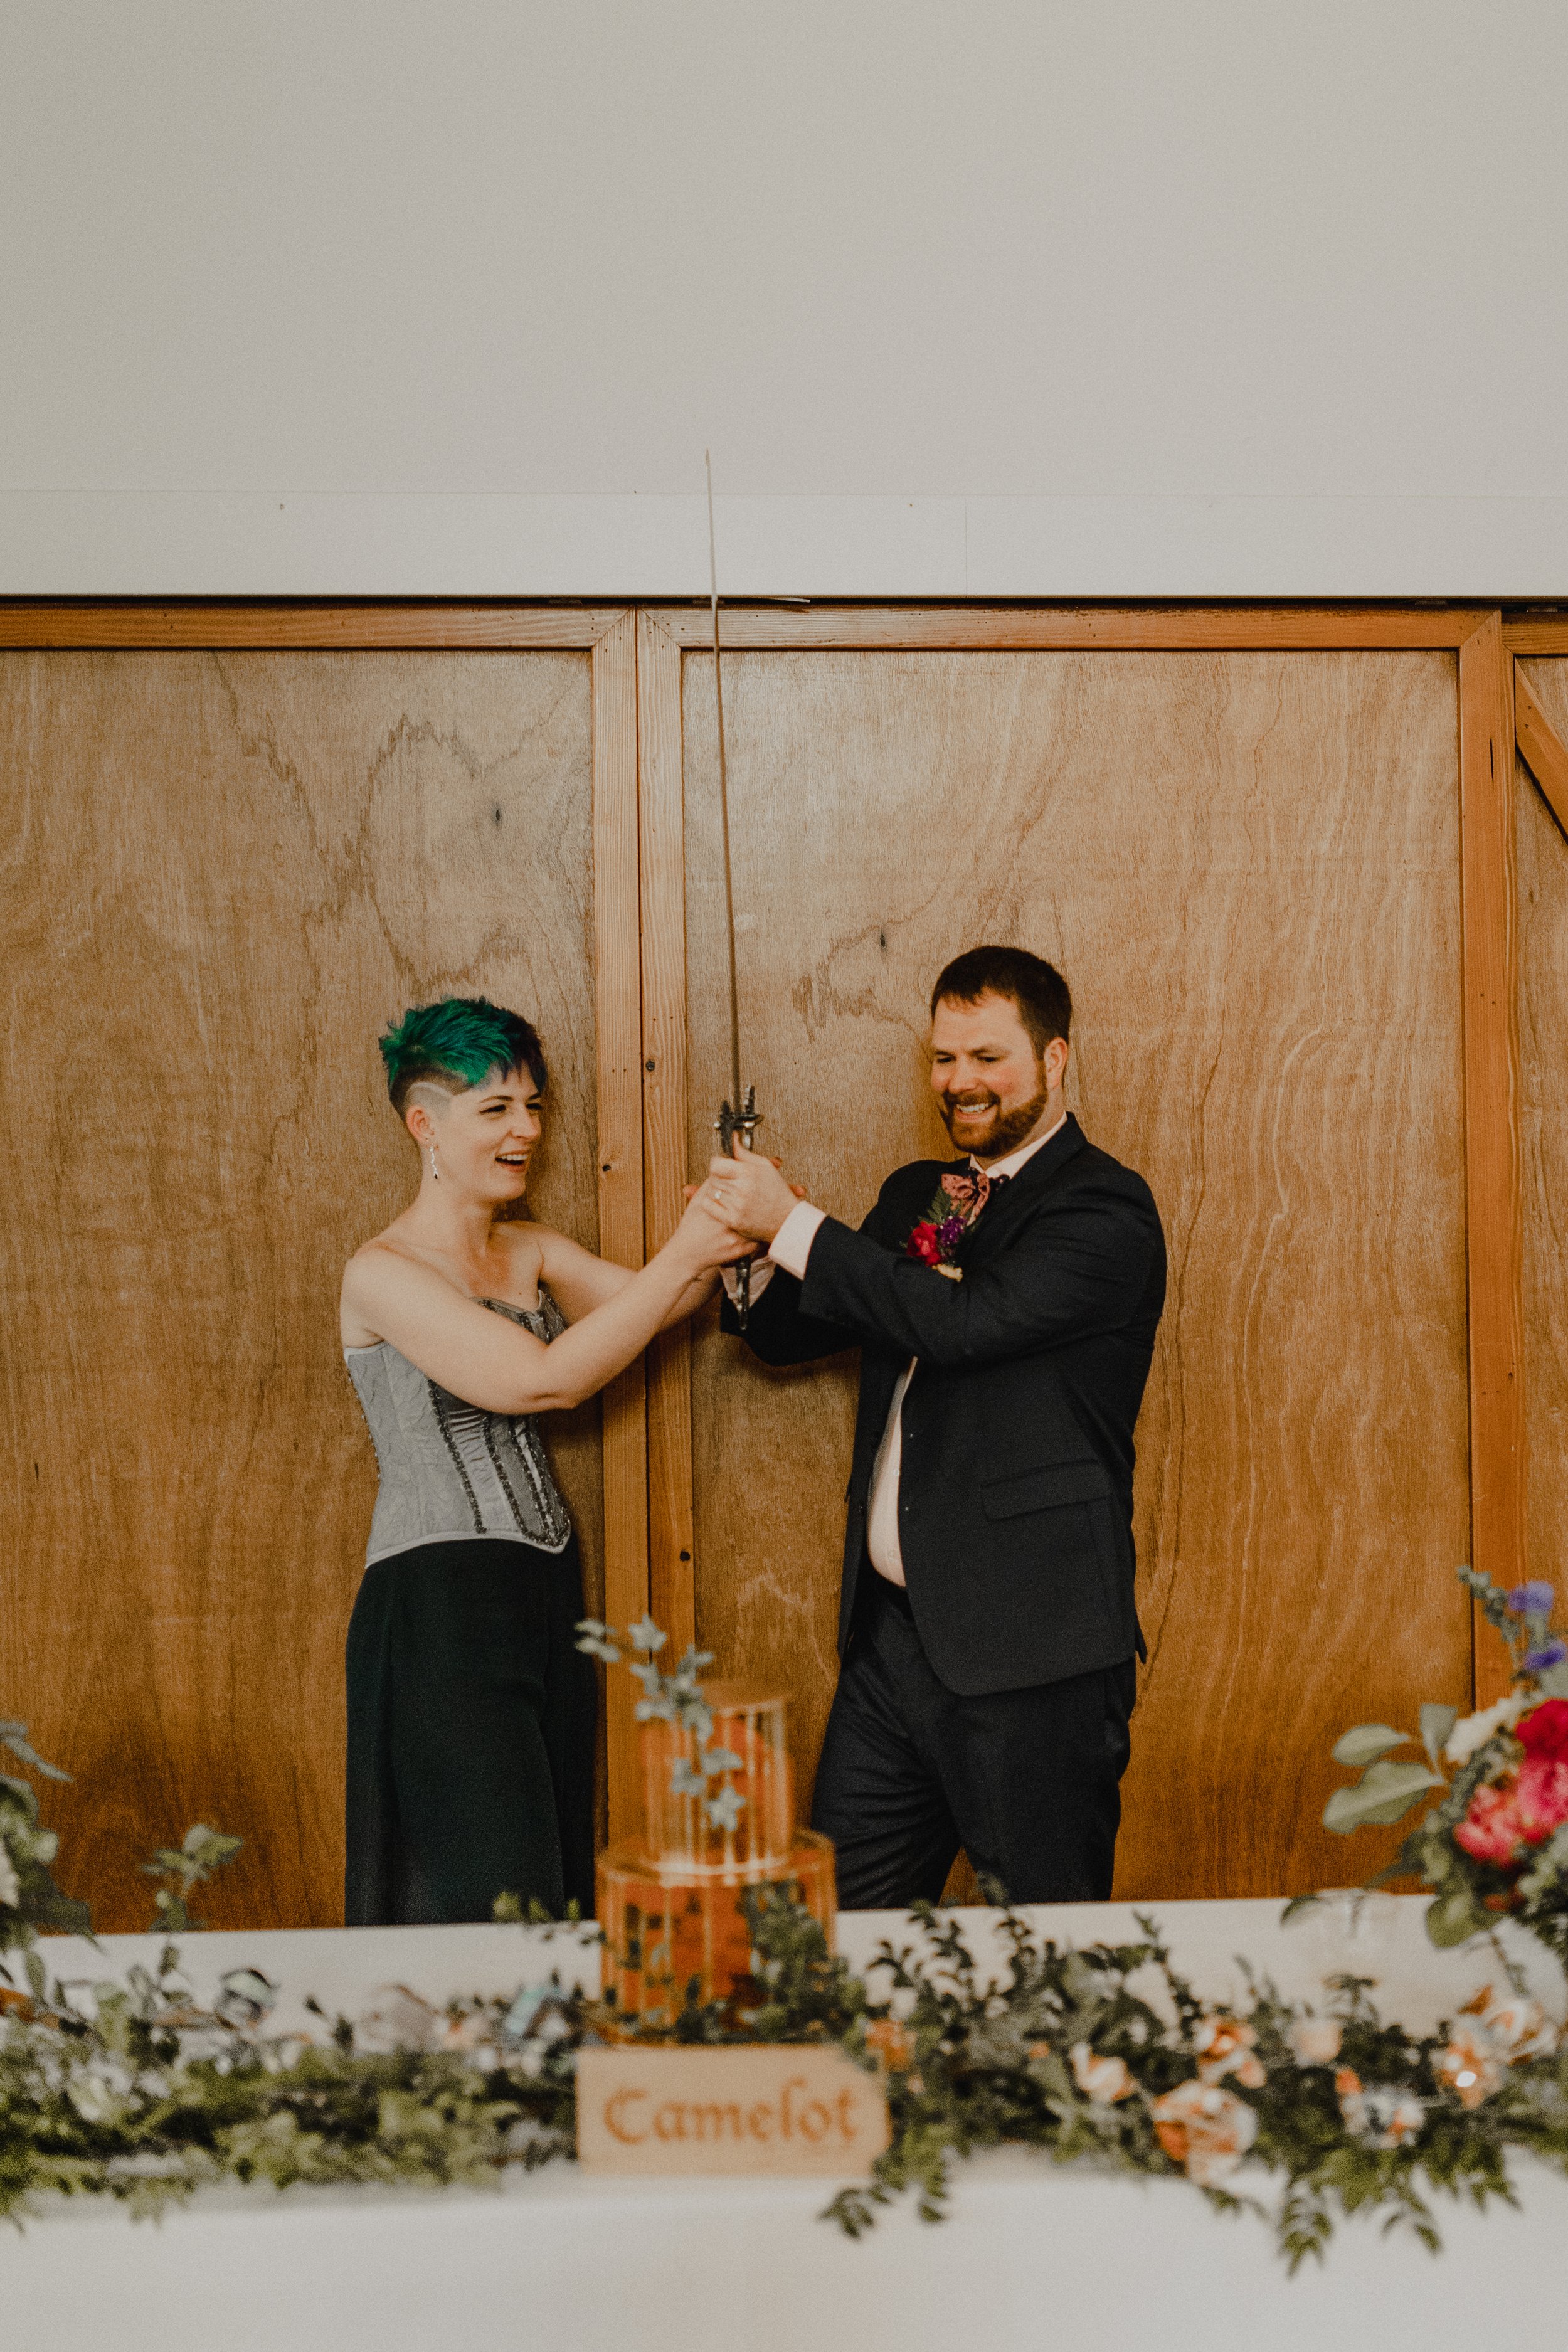  A marrier and their groom hold a sword in the air between them above their wedding cake in preparation of cutting the cake with the sword. 